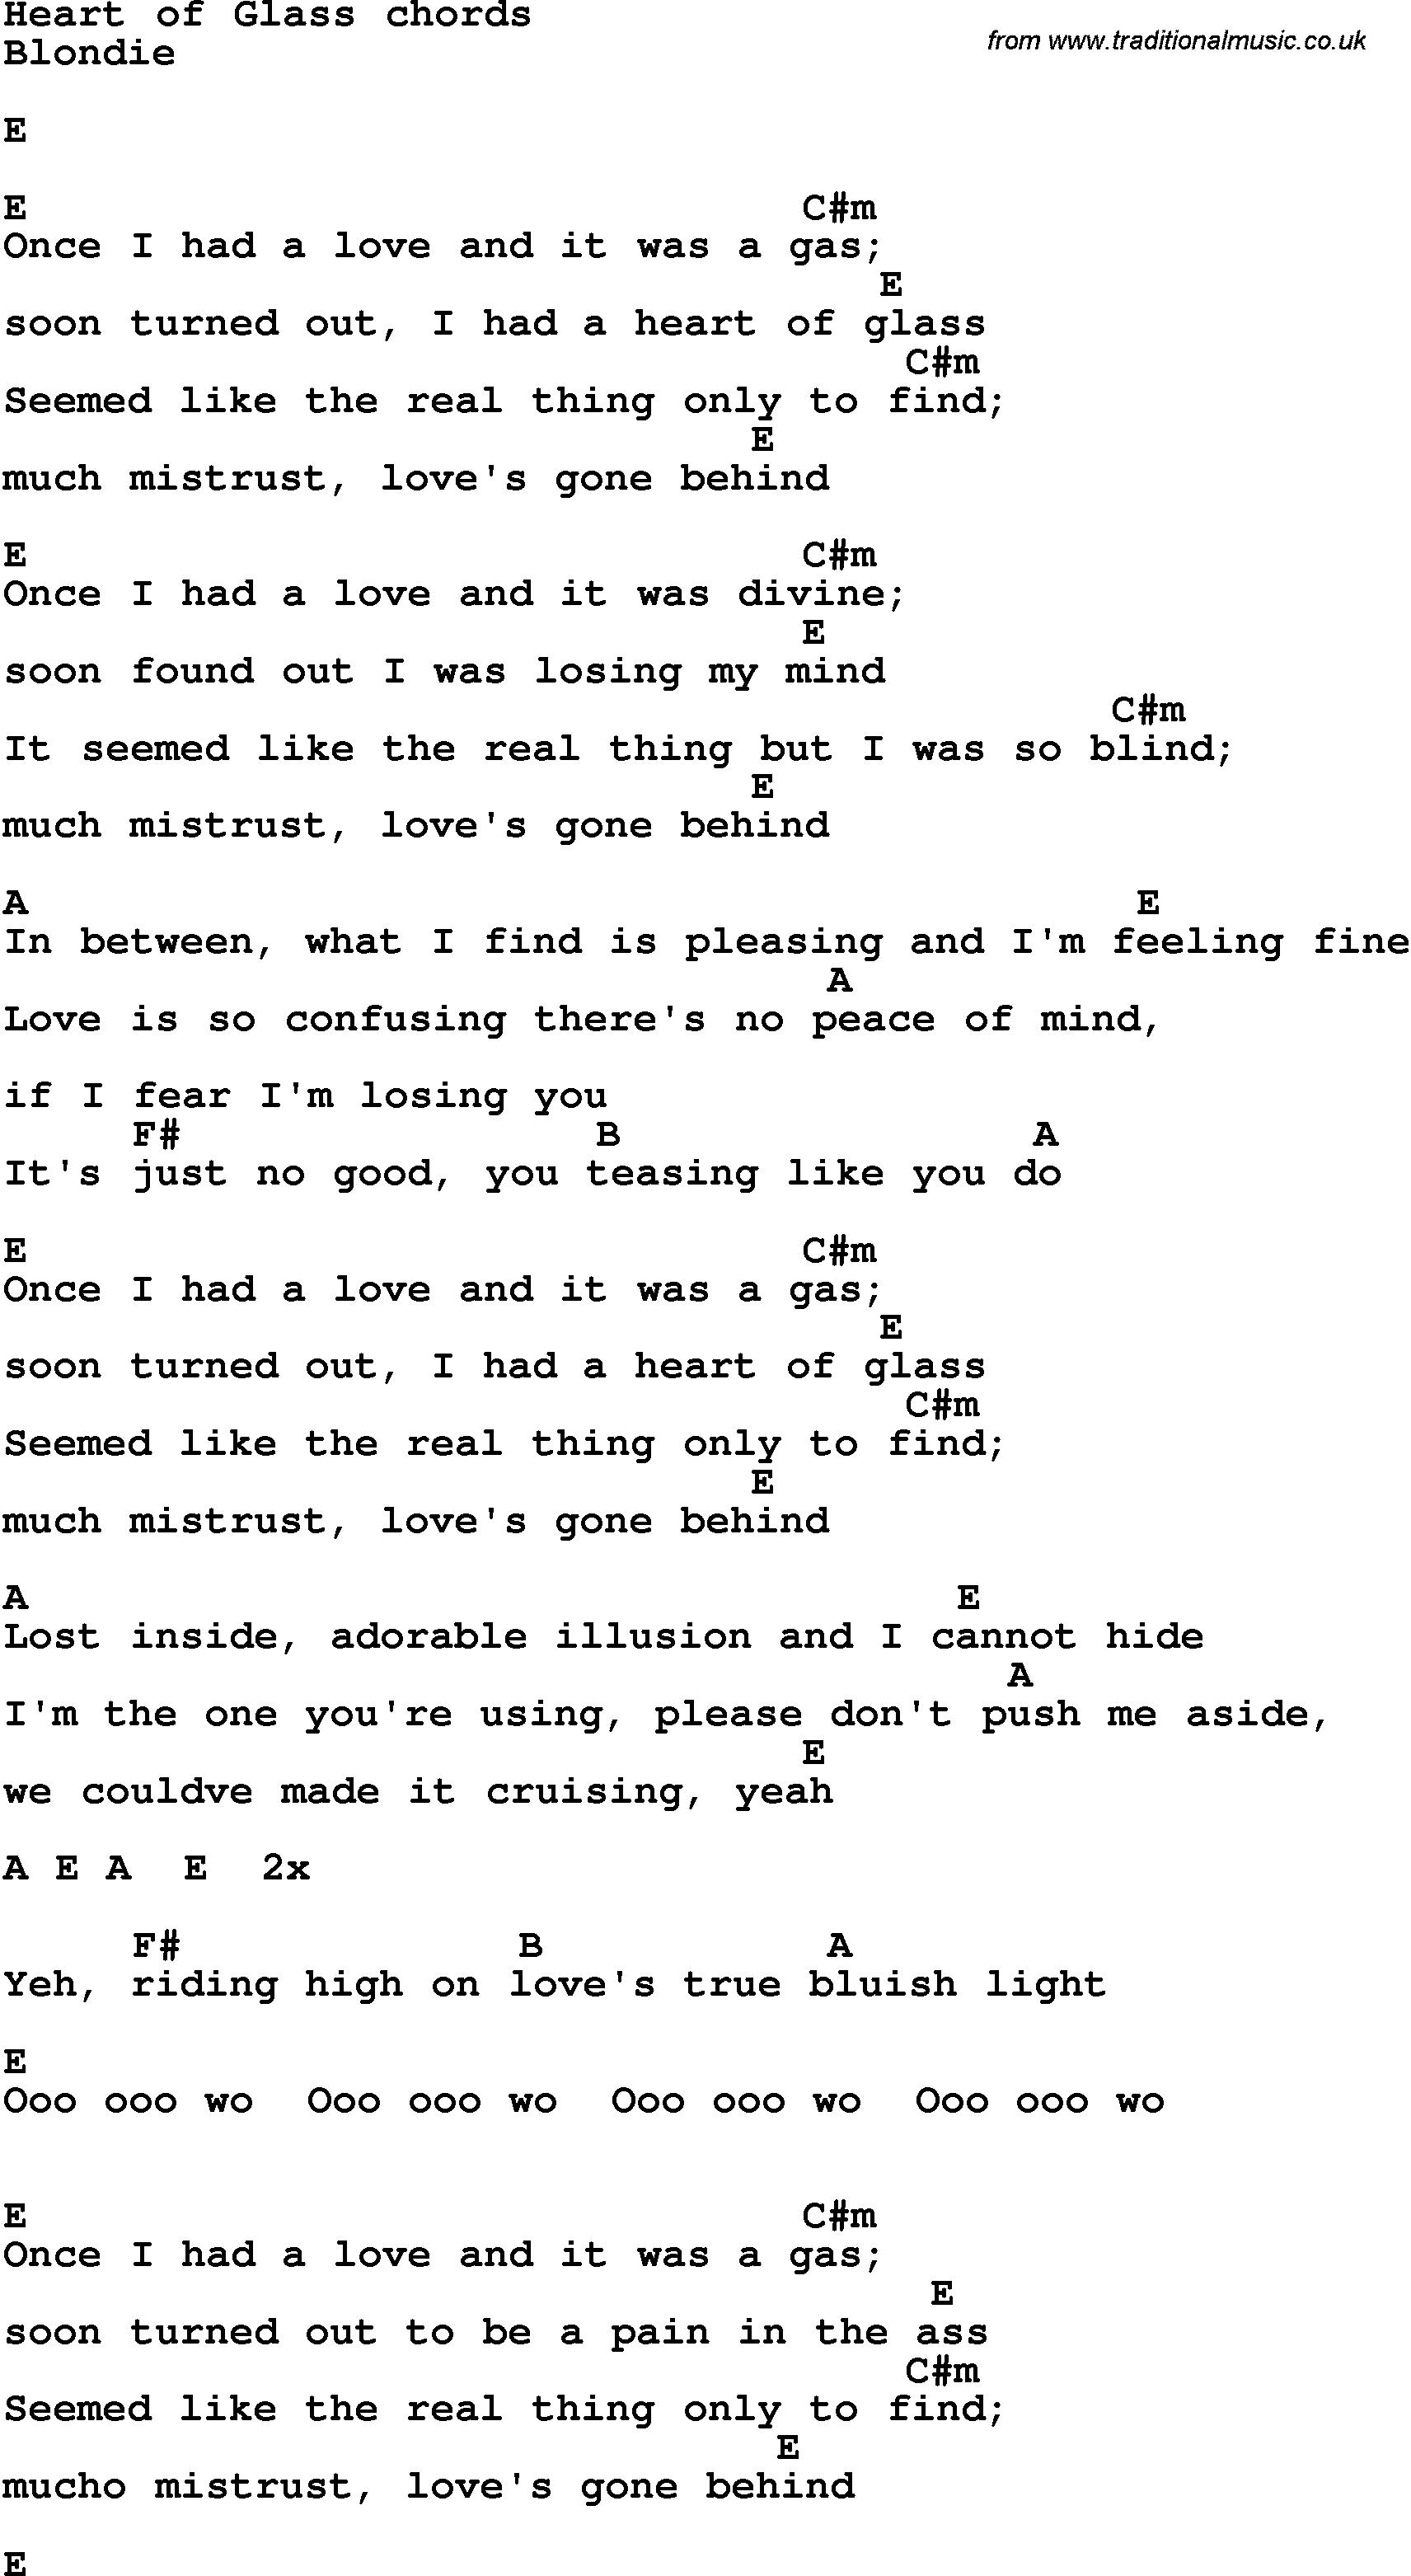 Song Lyrics with guitar chords for Heart Of Glass